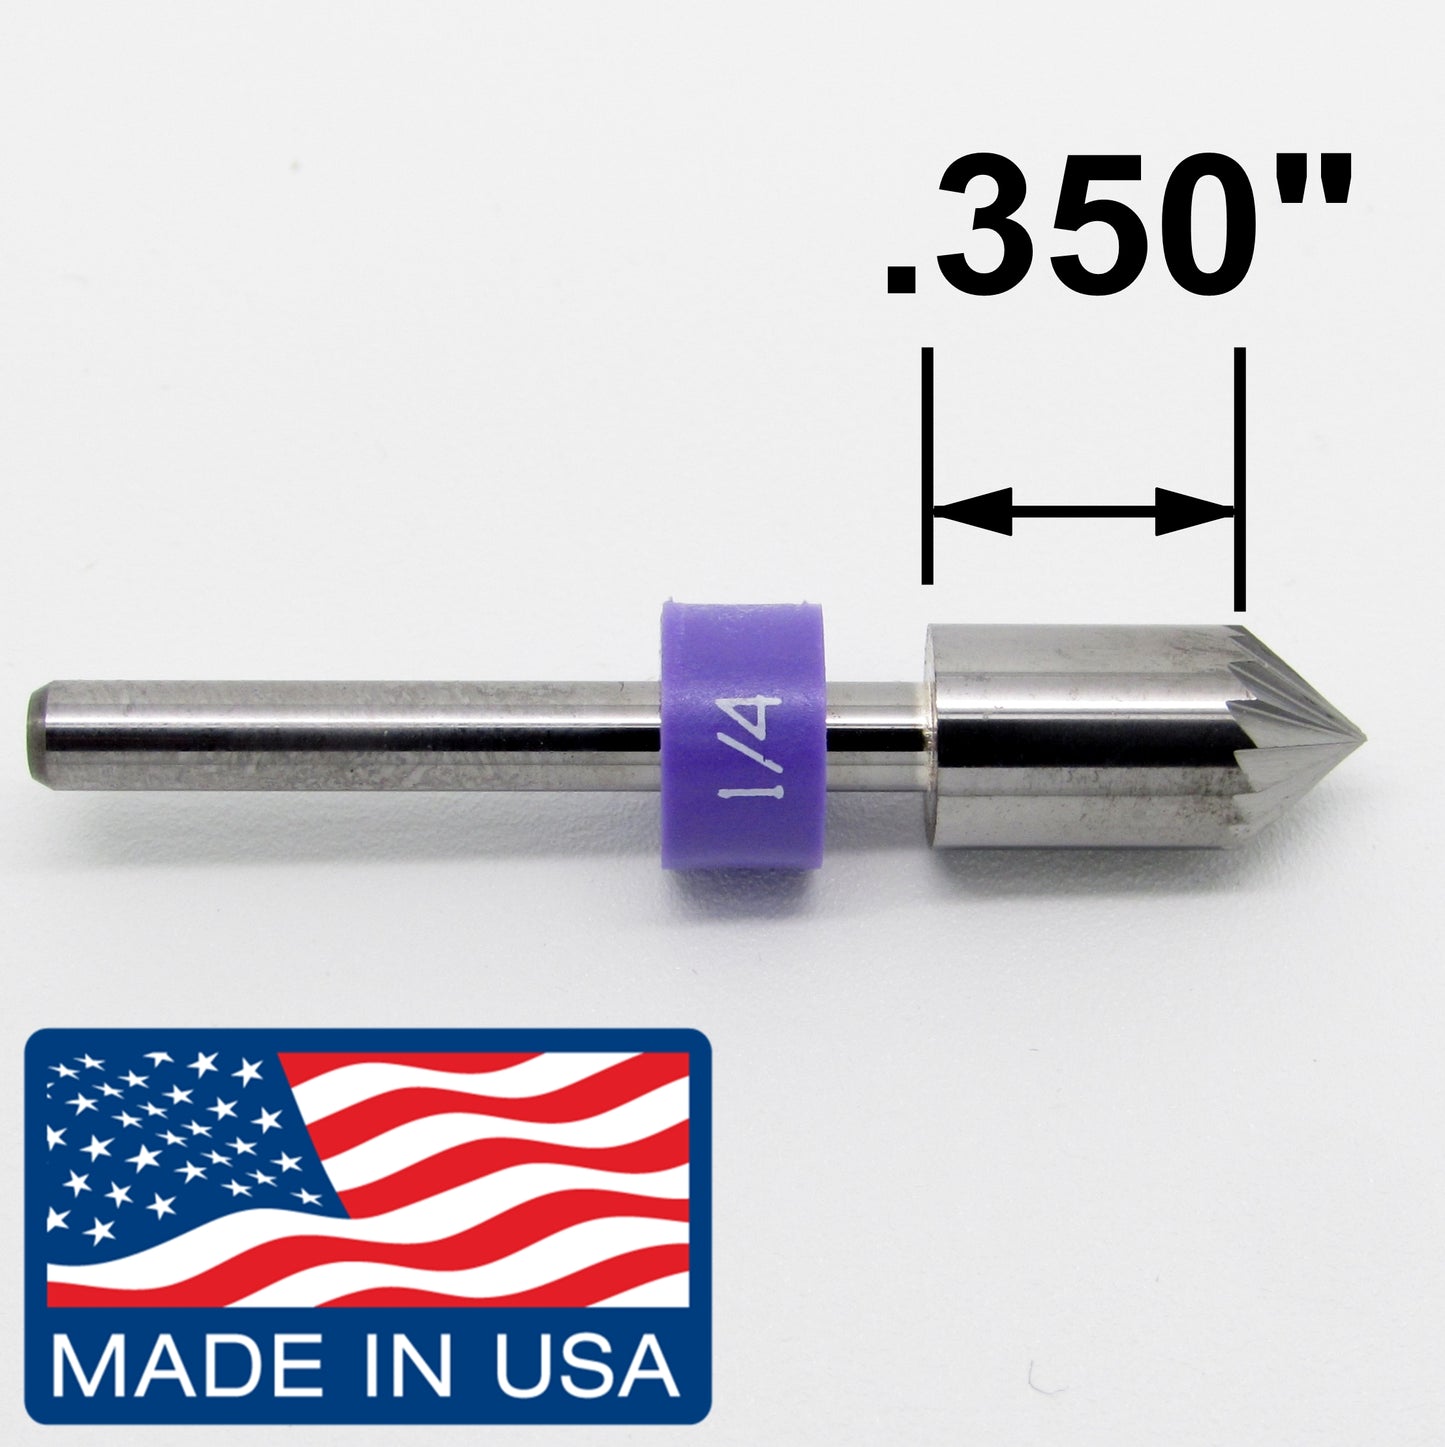 1/4" .250" 82 Degree Carbide Countersink - 16 Flutes - 1/8" Shank - Made in USA